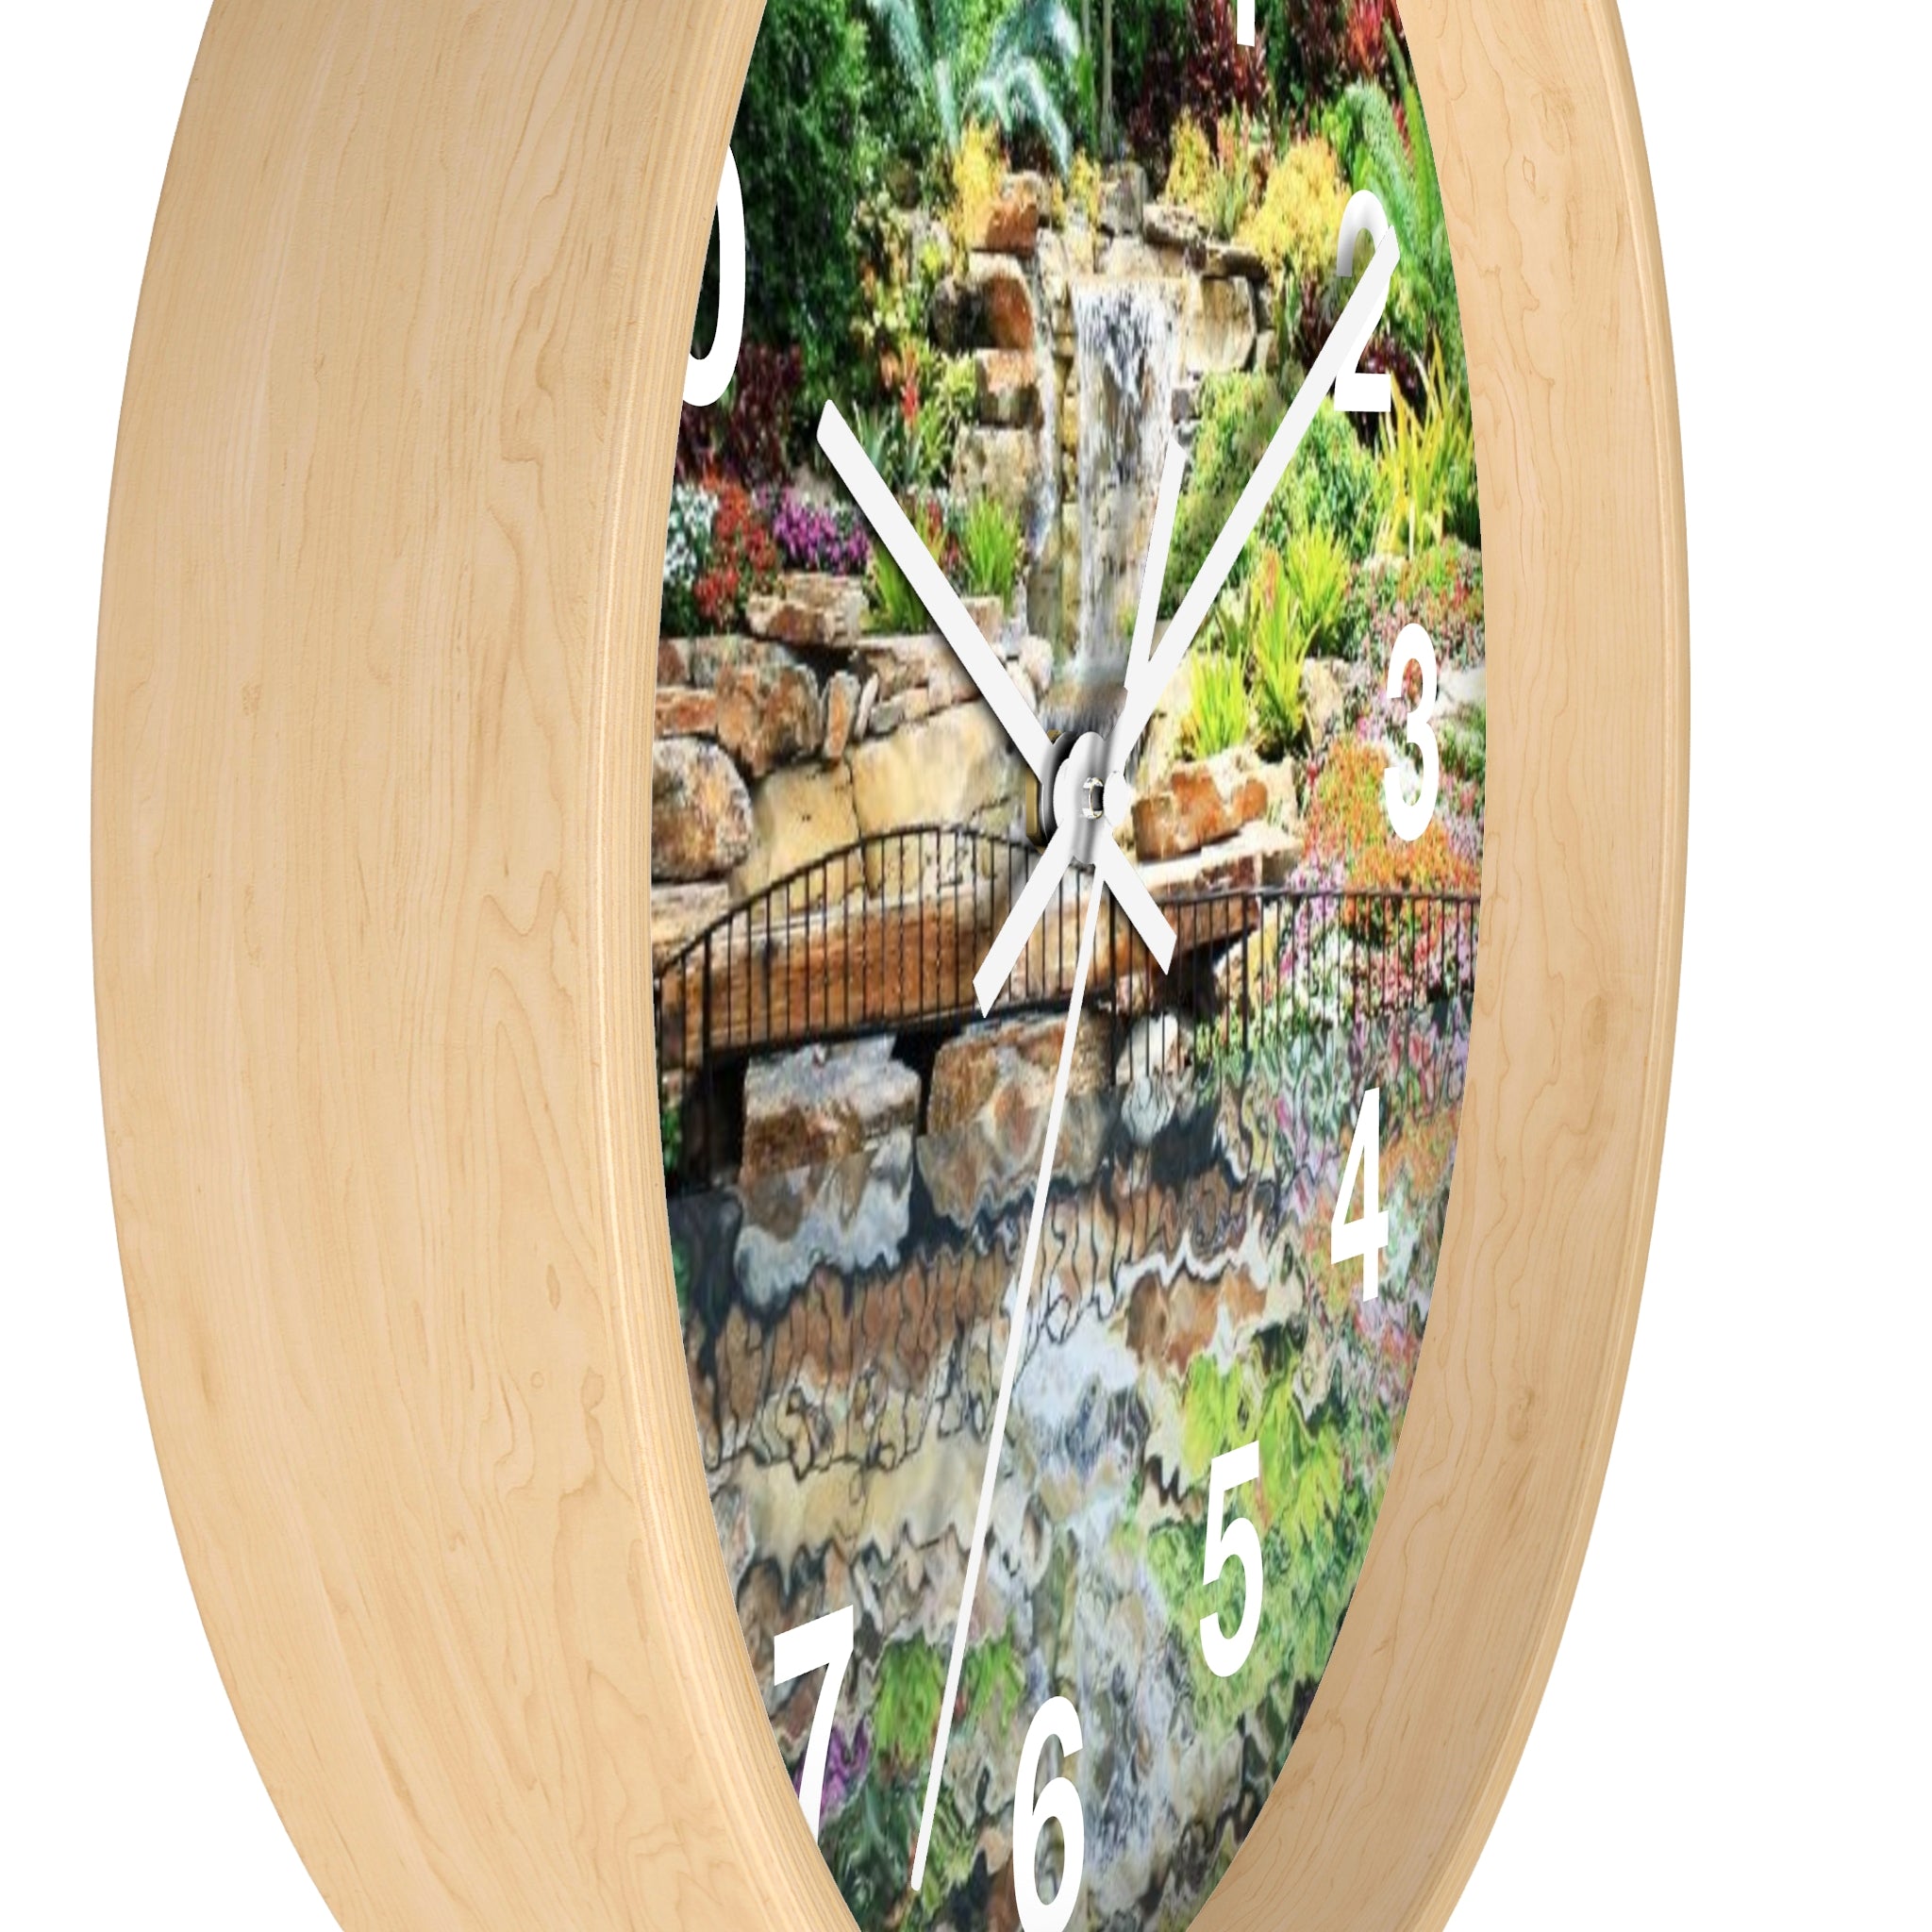 Tropical Waterfall with an Abstract Painting Reflection Wall Clock - Shell Design Boutique